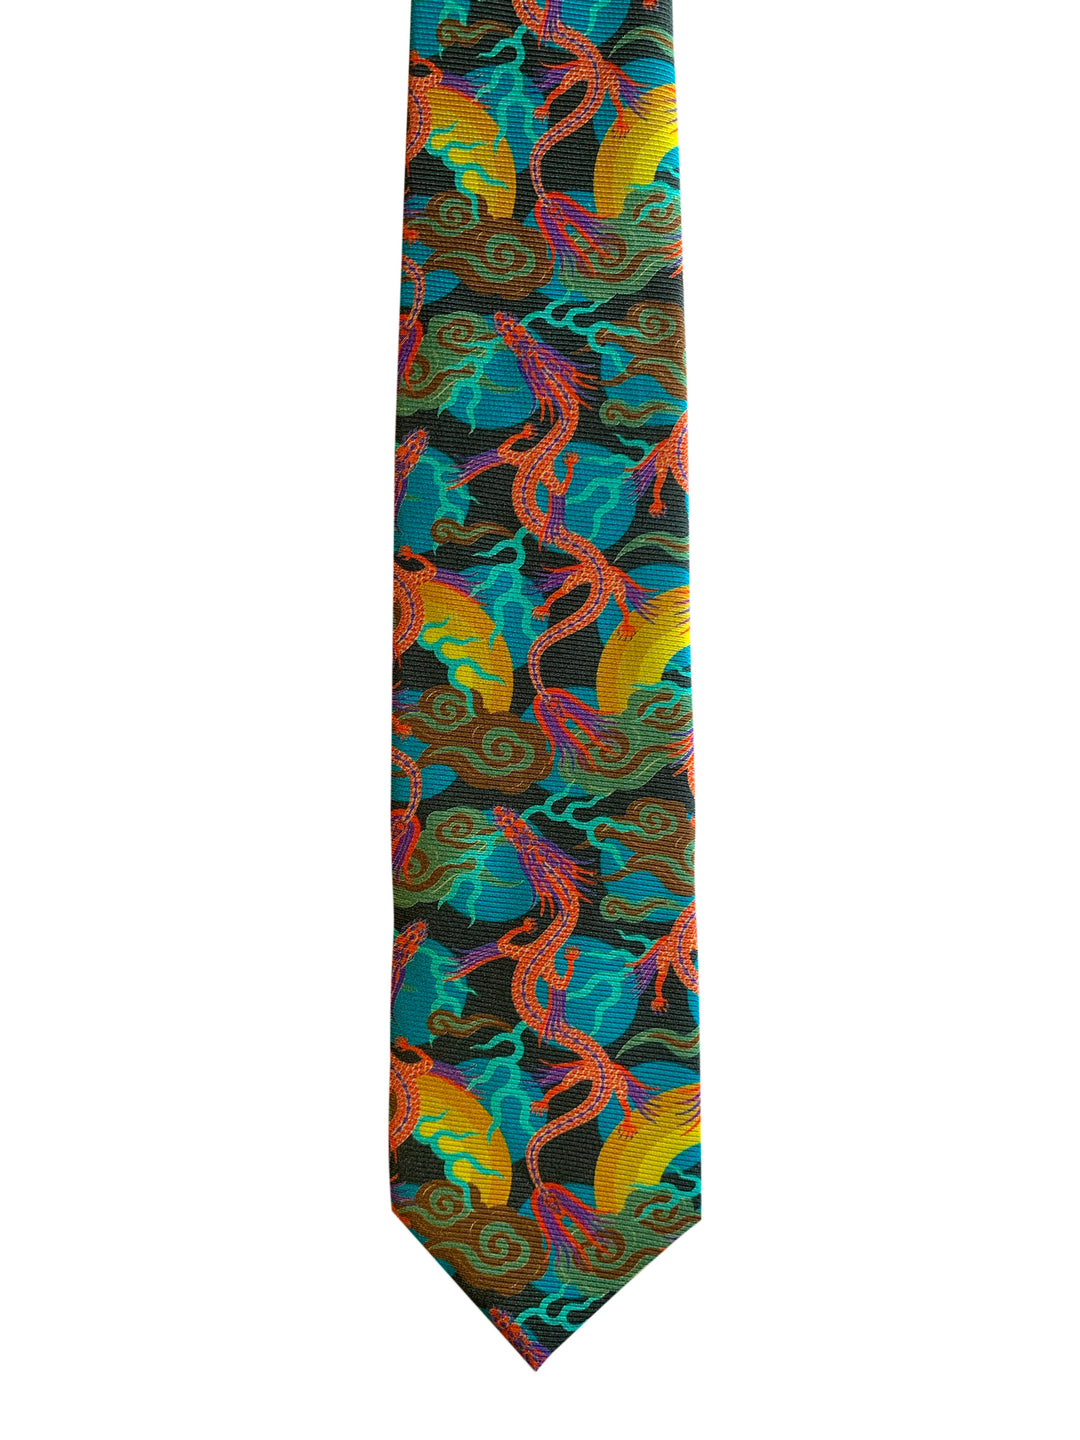 bold ties, luxury silk neckties, made in England, Dragons, Chinoiserie, Luxury Accessories, Gift Ideas for Him, Luxury Gifts